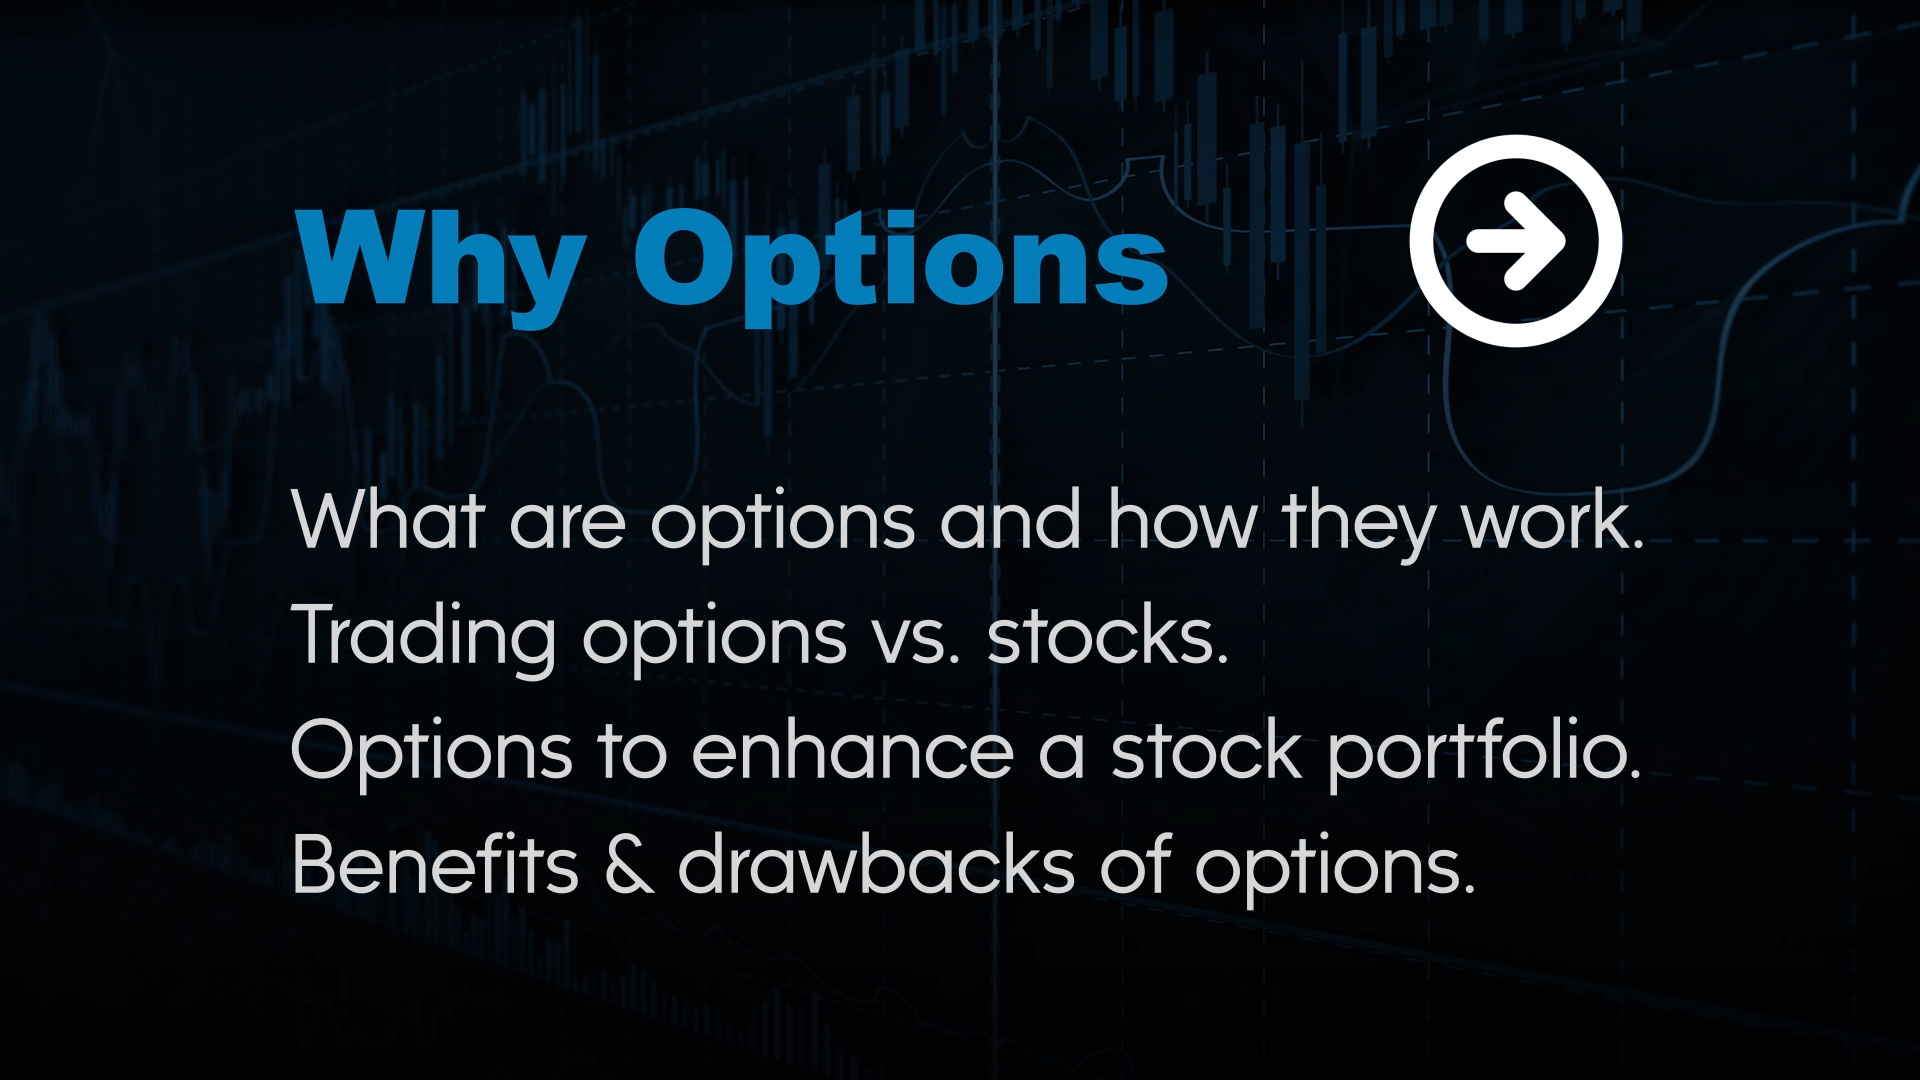 Introduction to Options